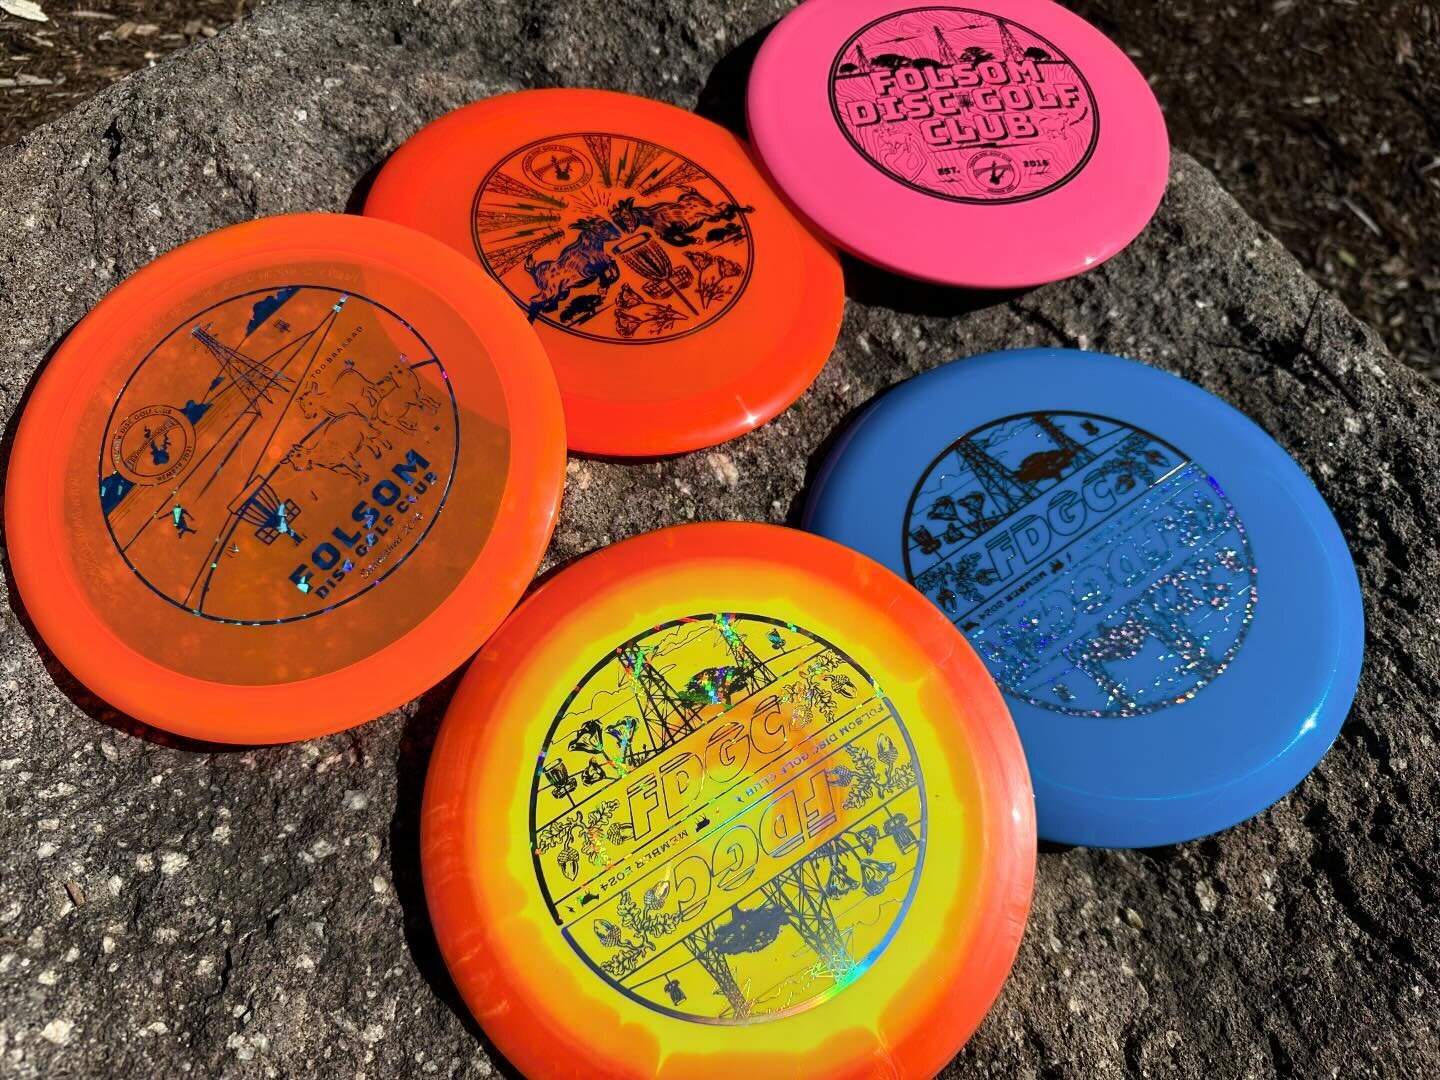 The best thing about being a local artist is working with local folks! I absolutely love the partnership I have with @folsomdgc - I discovered disc golf in 2015, but I really didn&rsquo;t start playing until 2020. I&rsquo;ve been very fortunate to me